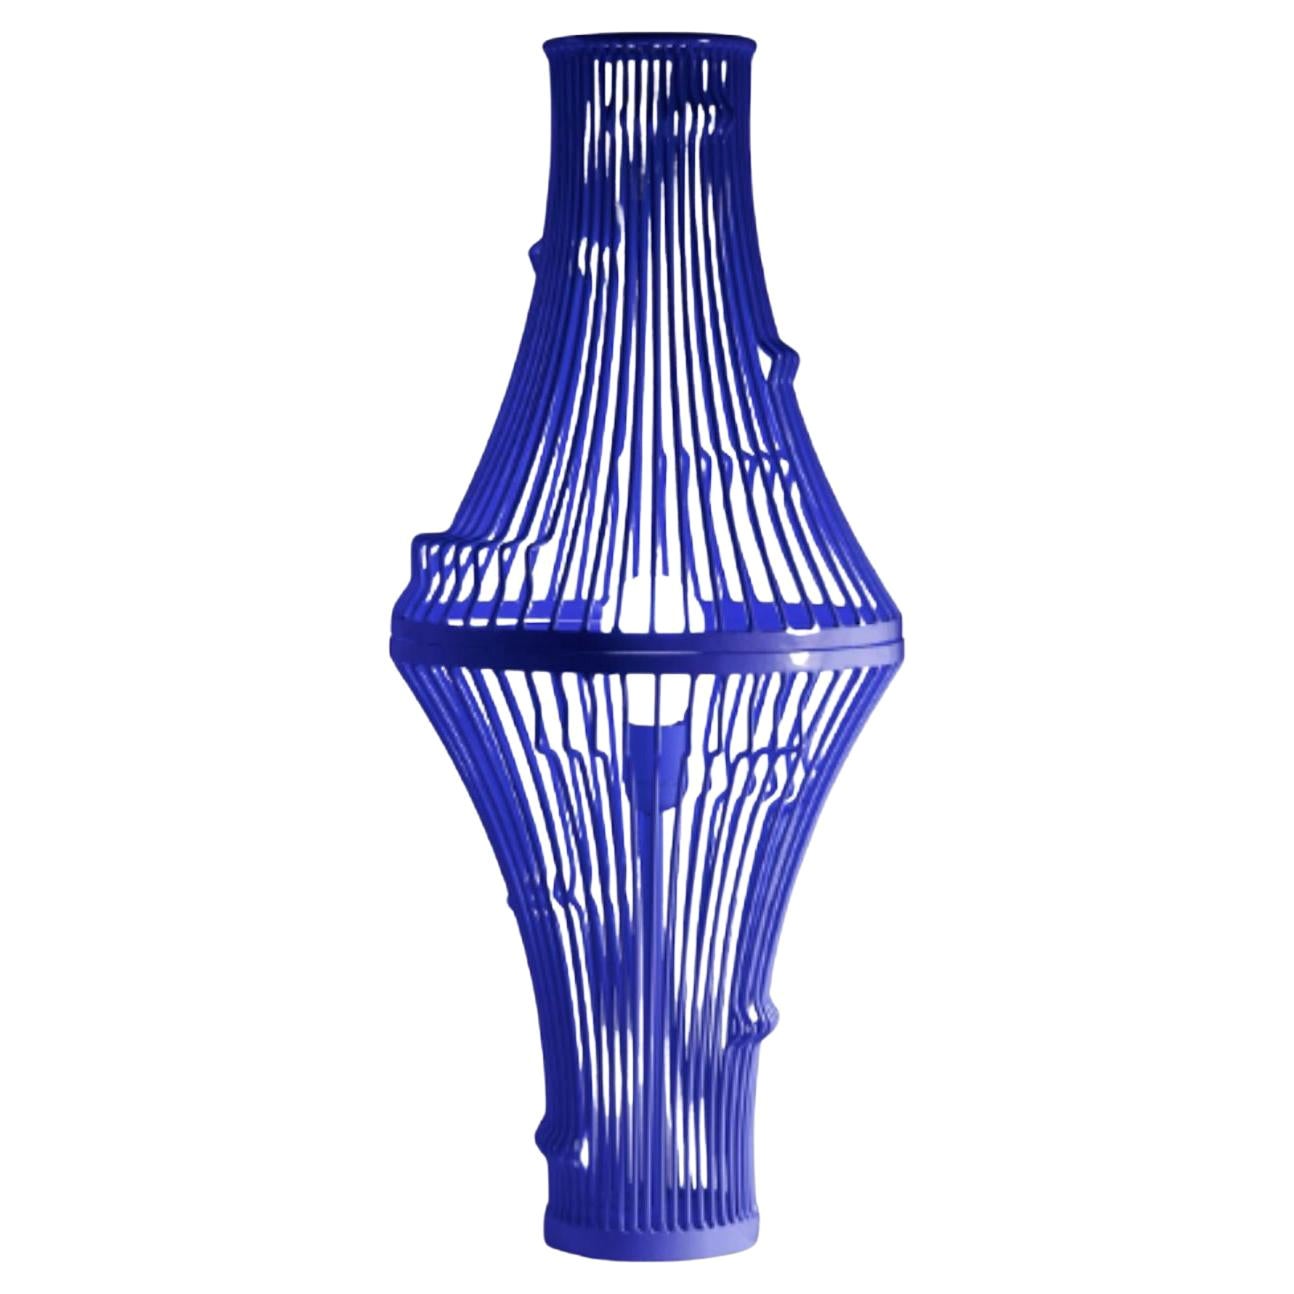 Cobalt Extrude I Table Lamp by Dooq